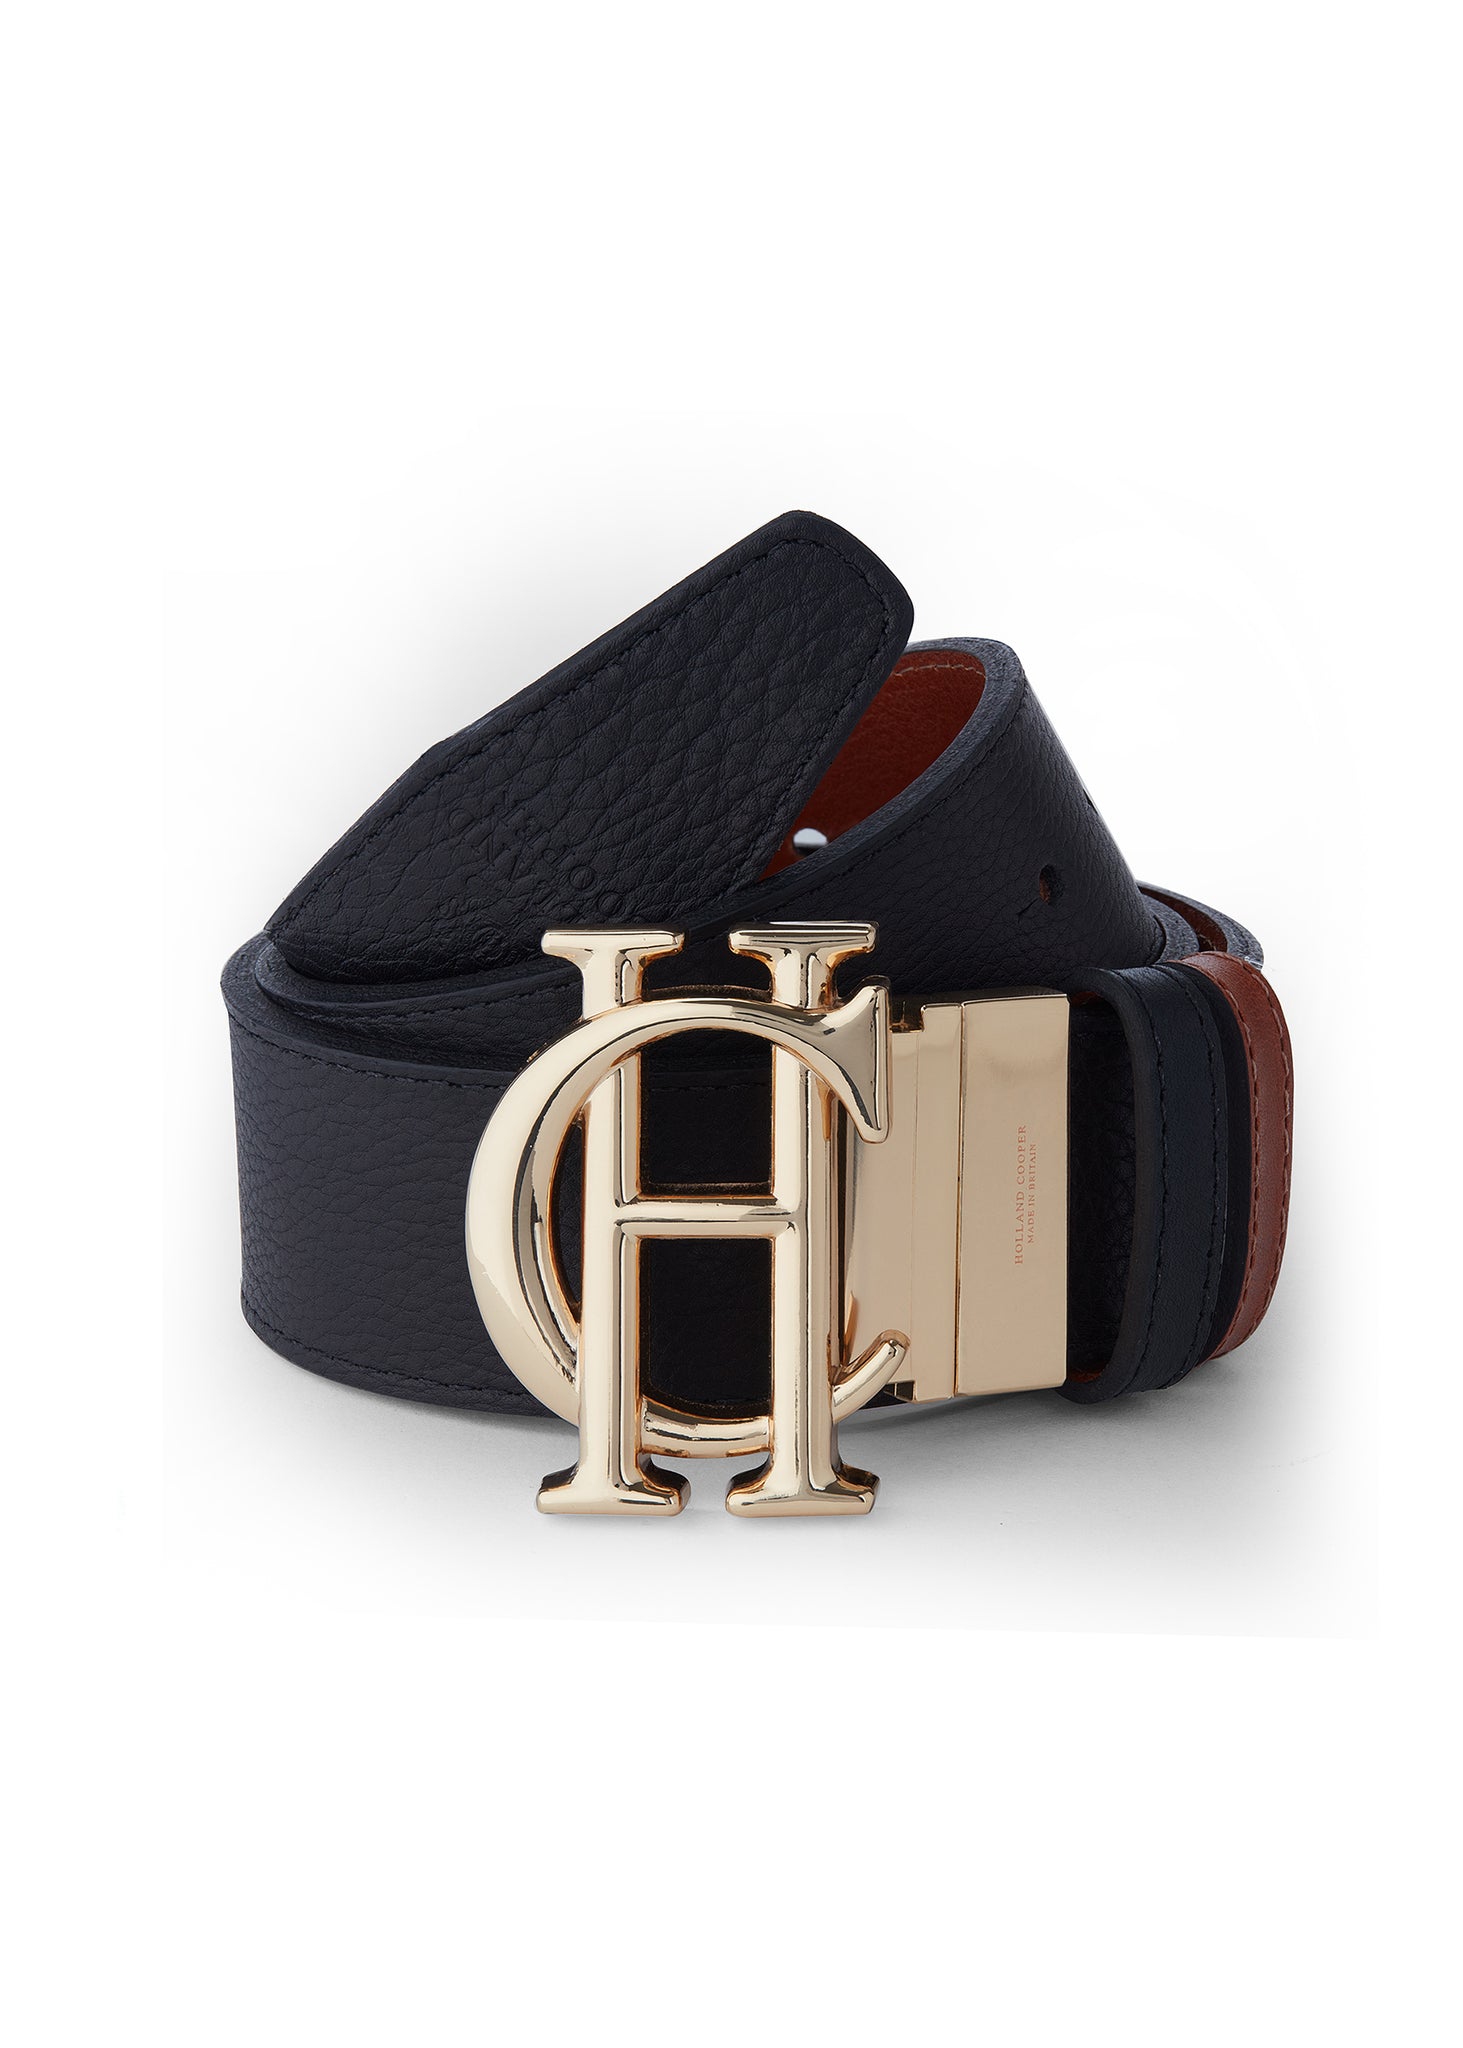 genuine leather reversible belt with tan on one side and black on the other featuring large gold hc belt fastening and 2 belt loops in both colours